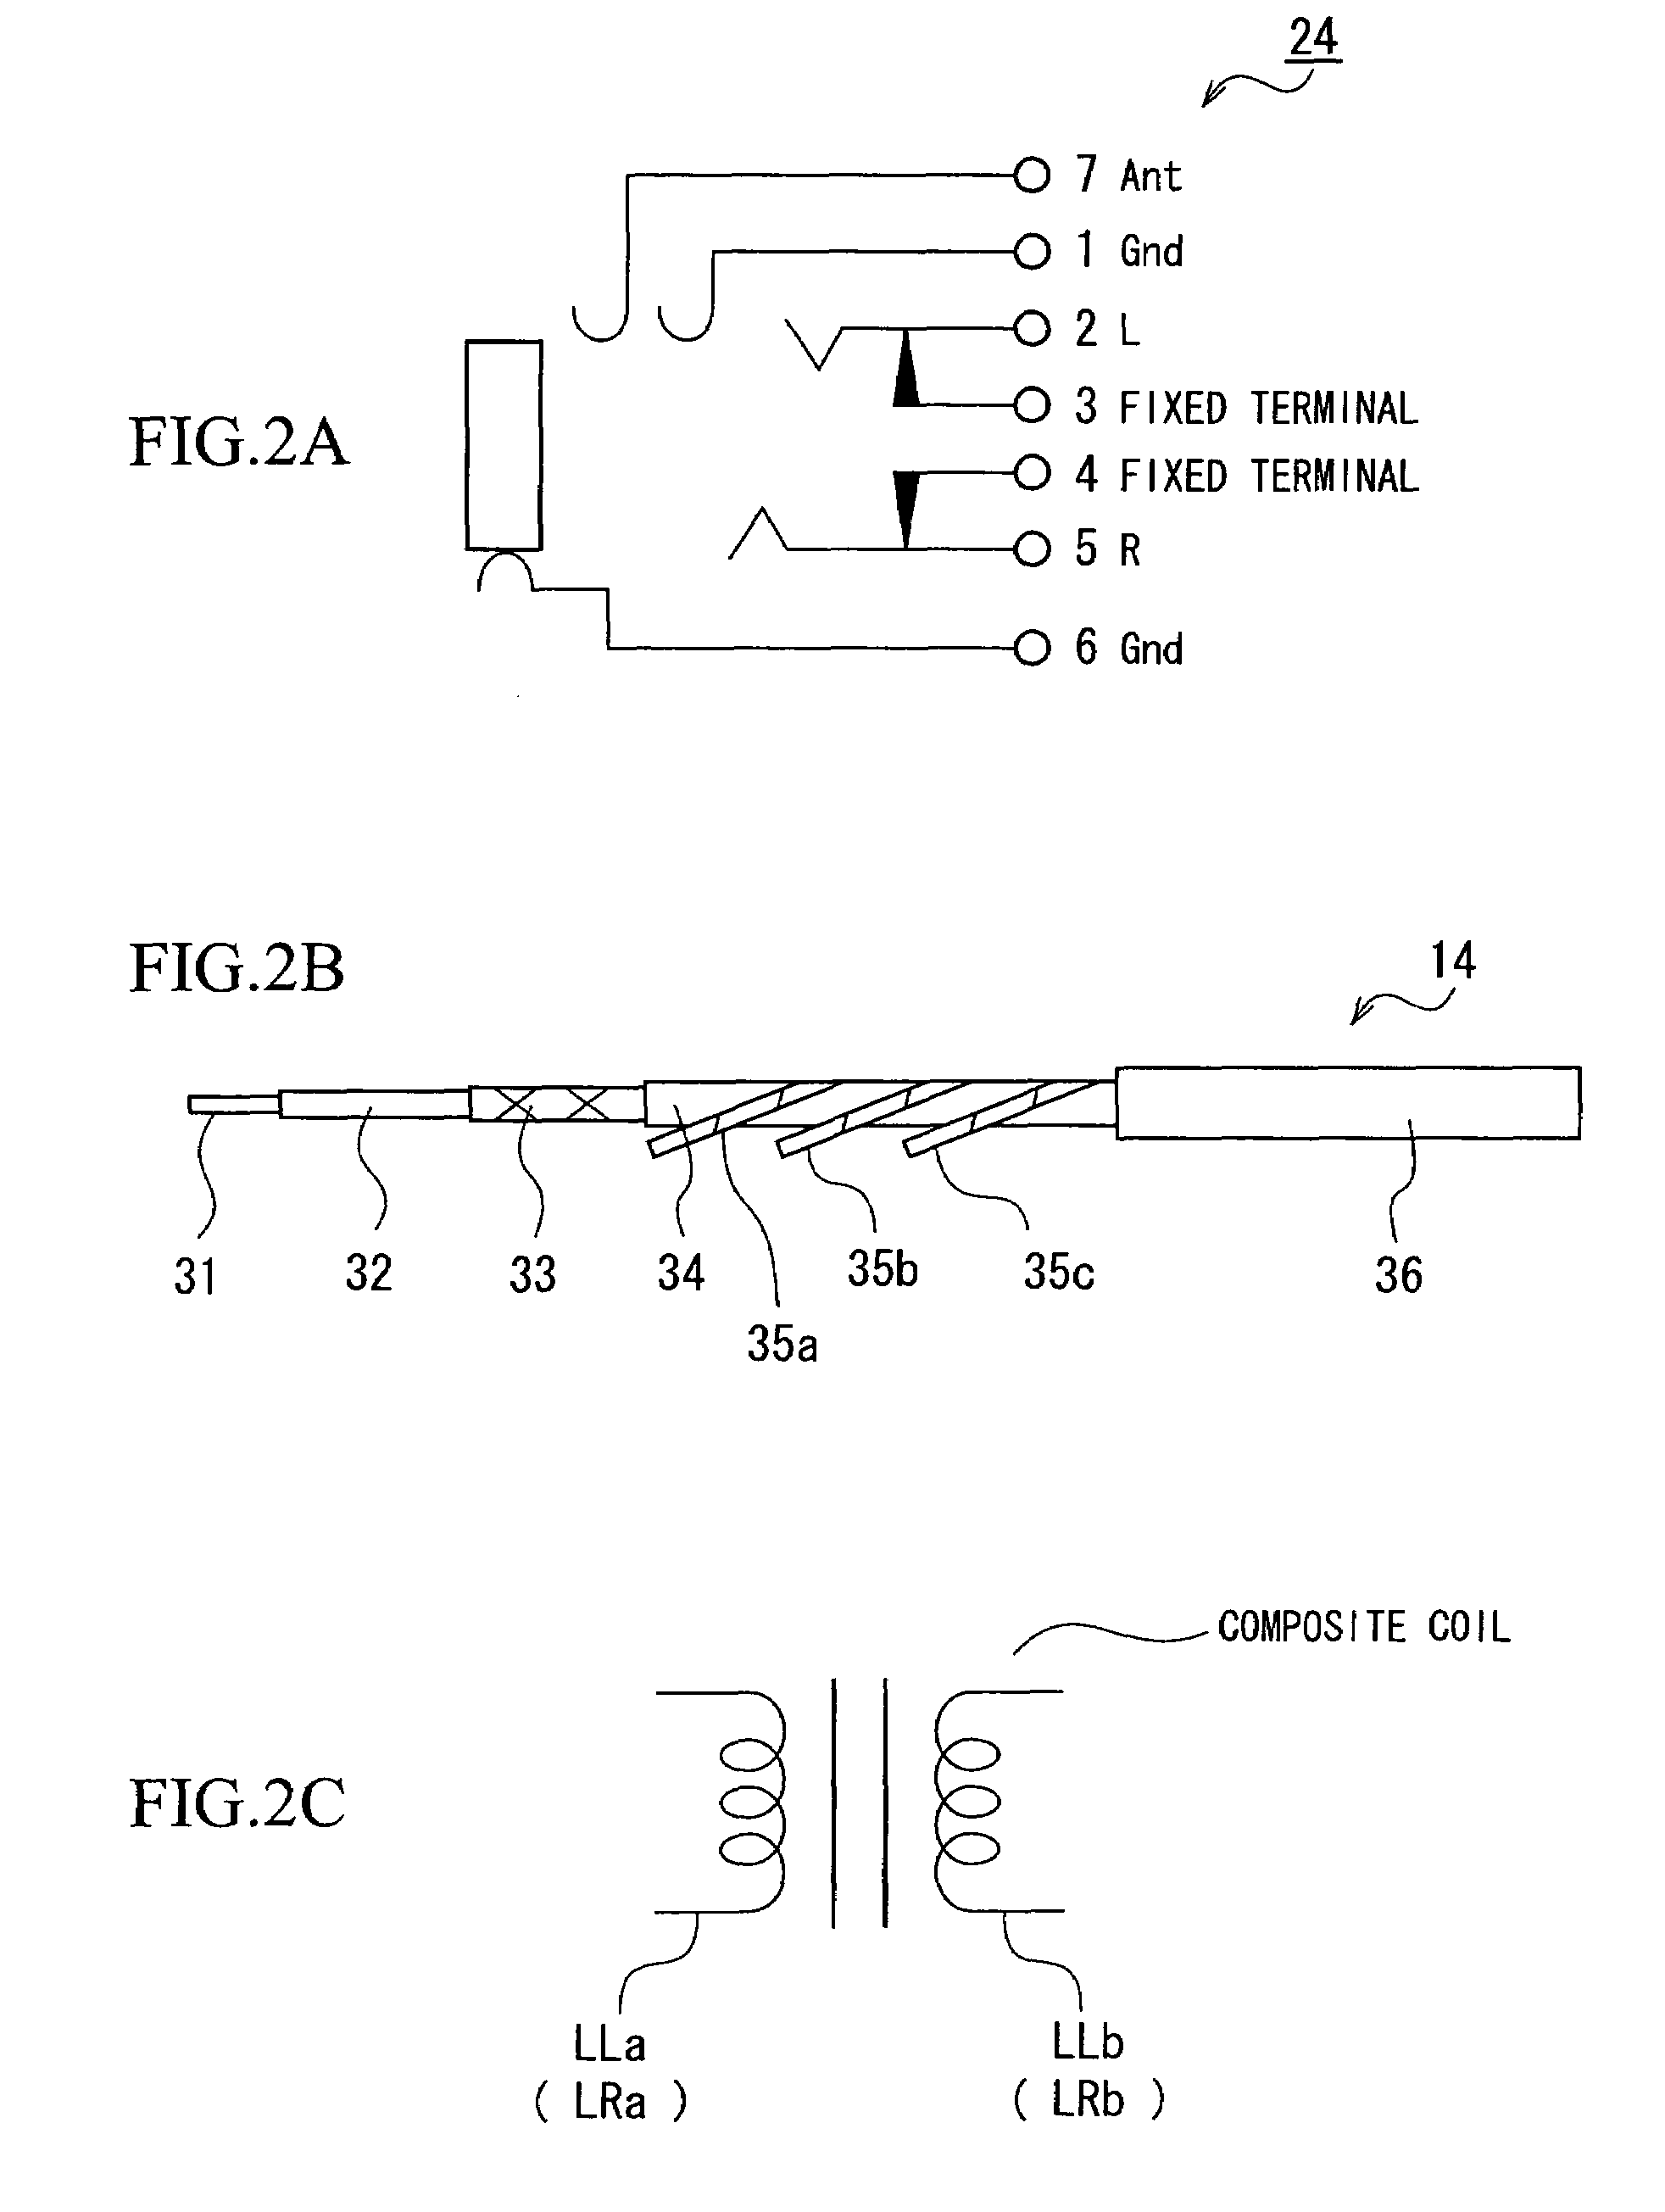 Earphone antenna, composite coil and coaxial cable used therefor, and wireless device provided with the earphone antenna